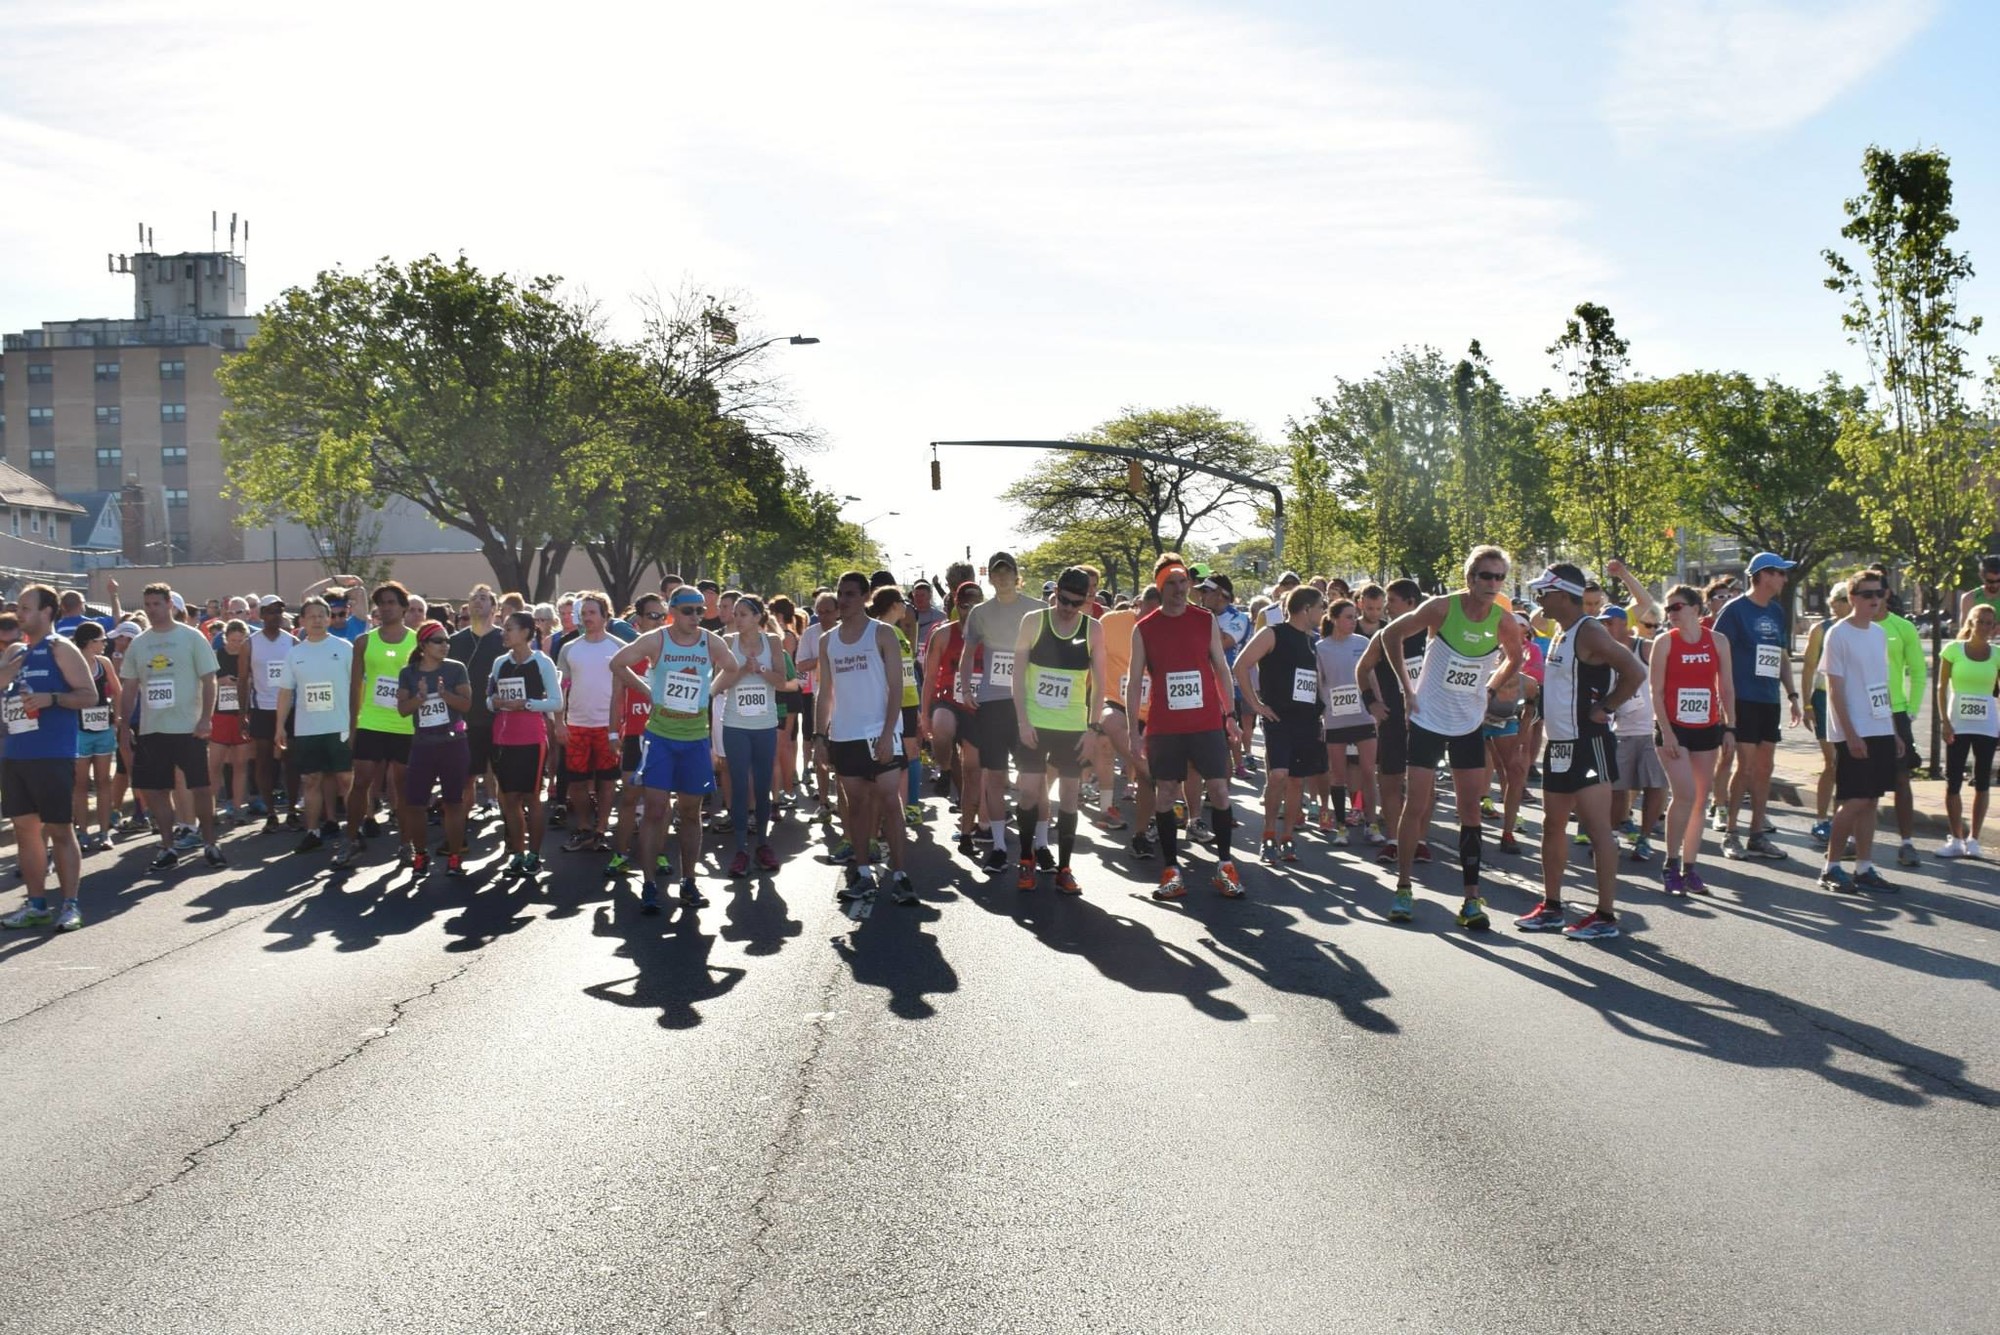 The starting line was packed with hundreds of runners.